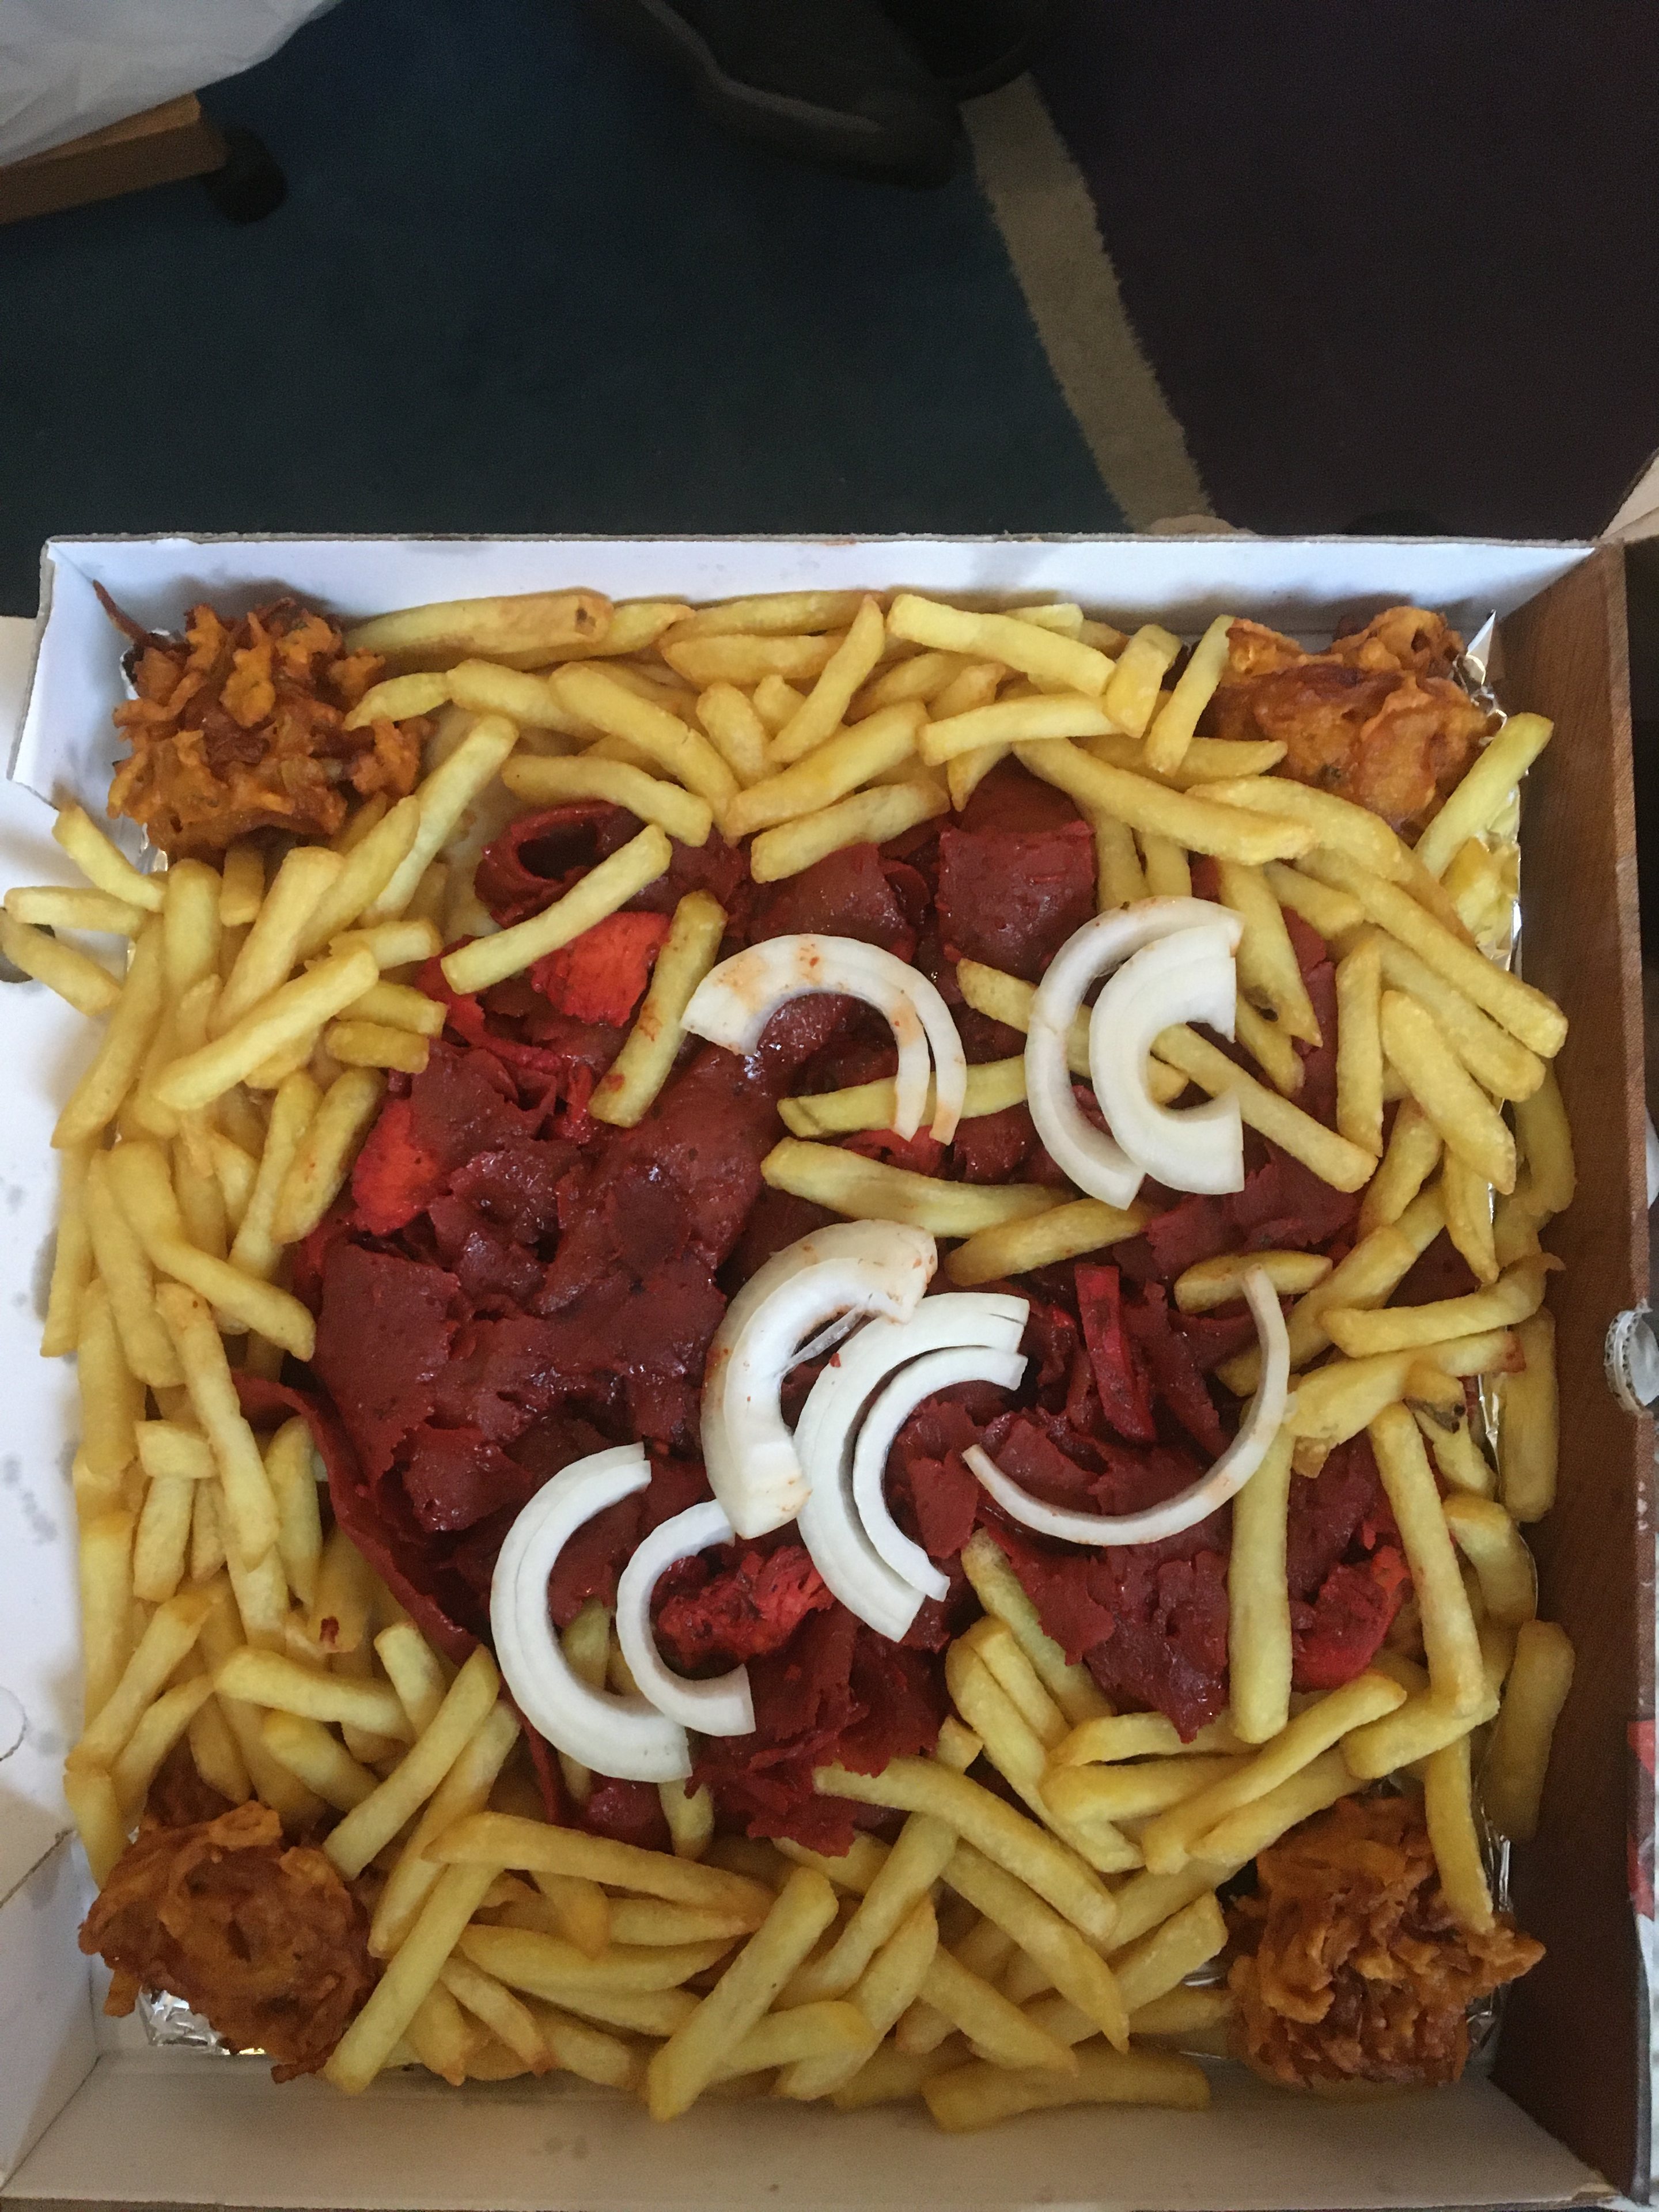 Dirty Takeaway Pictures Volume 3 - Page 489 - Food, Drink & Restaurants - PistonHeads